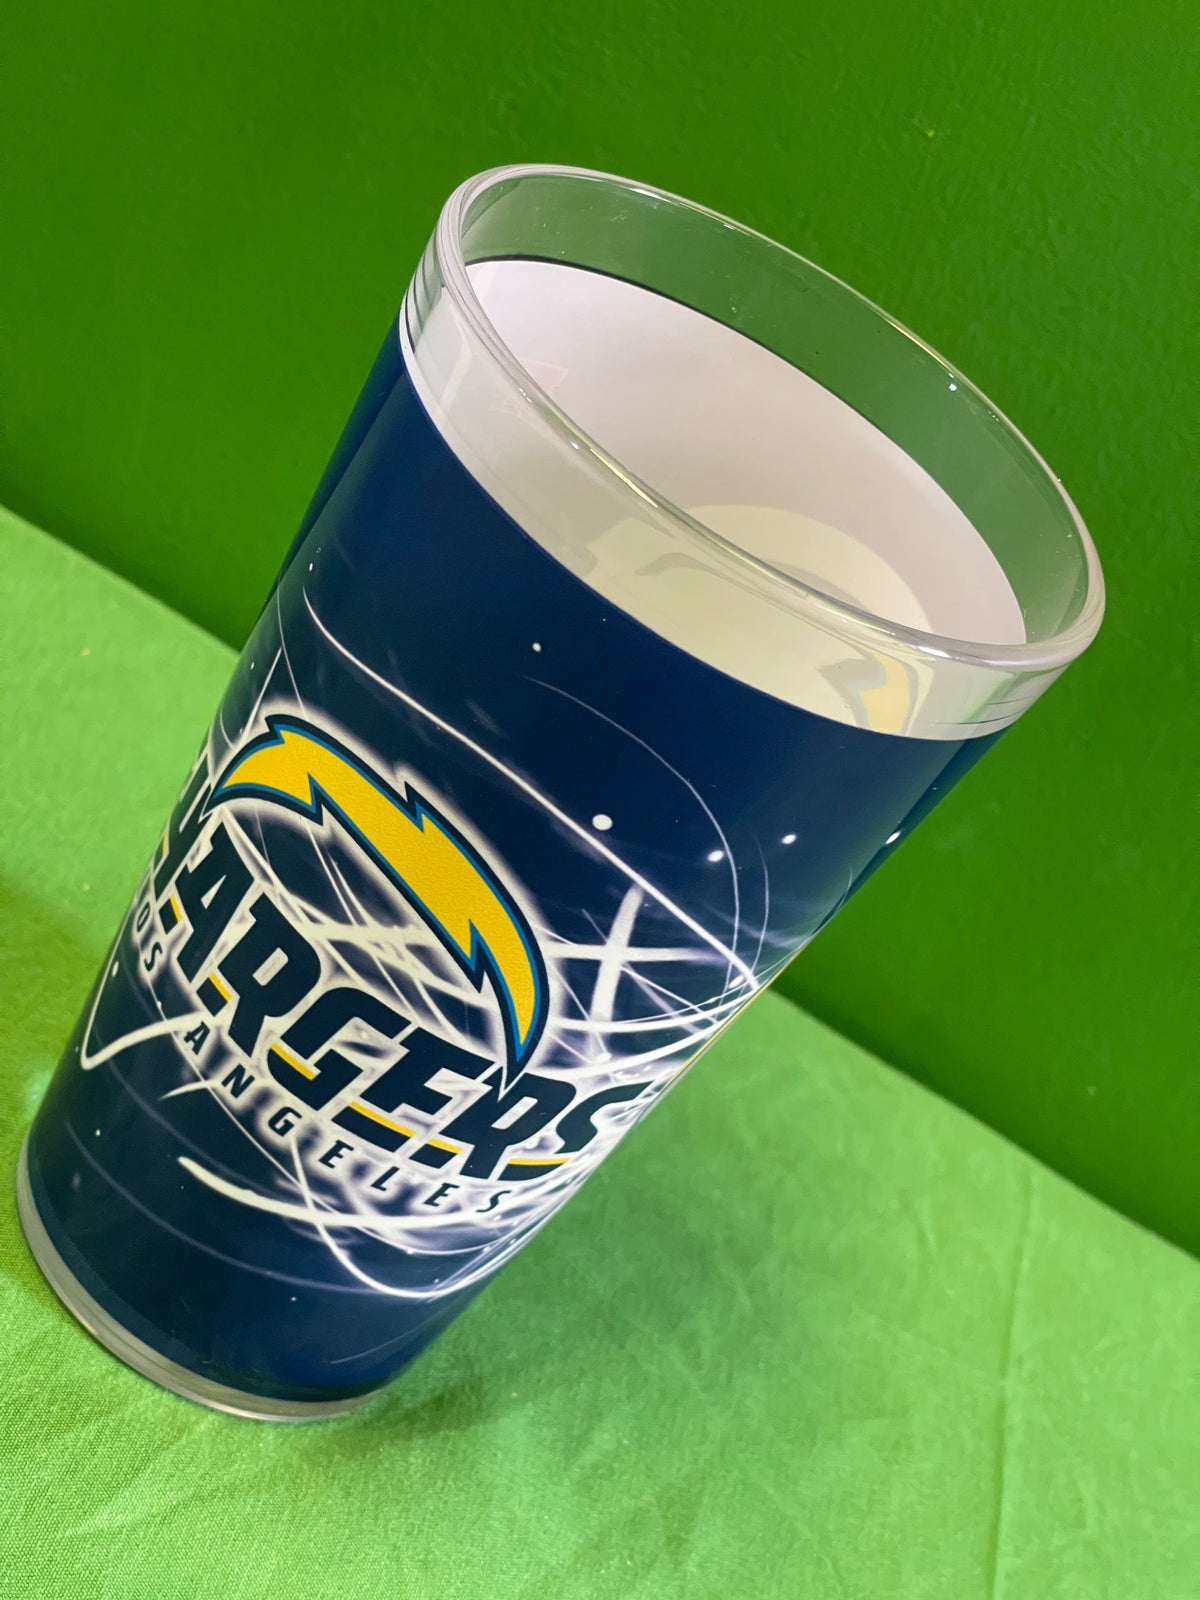 NFL Los Angeles Chargers Licensed 16 oz Pint Glass/Tumbler NWT